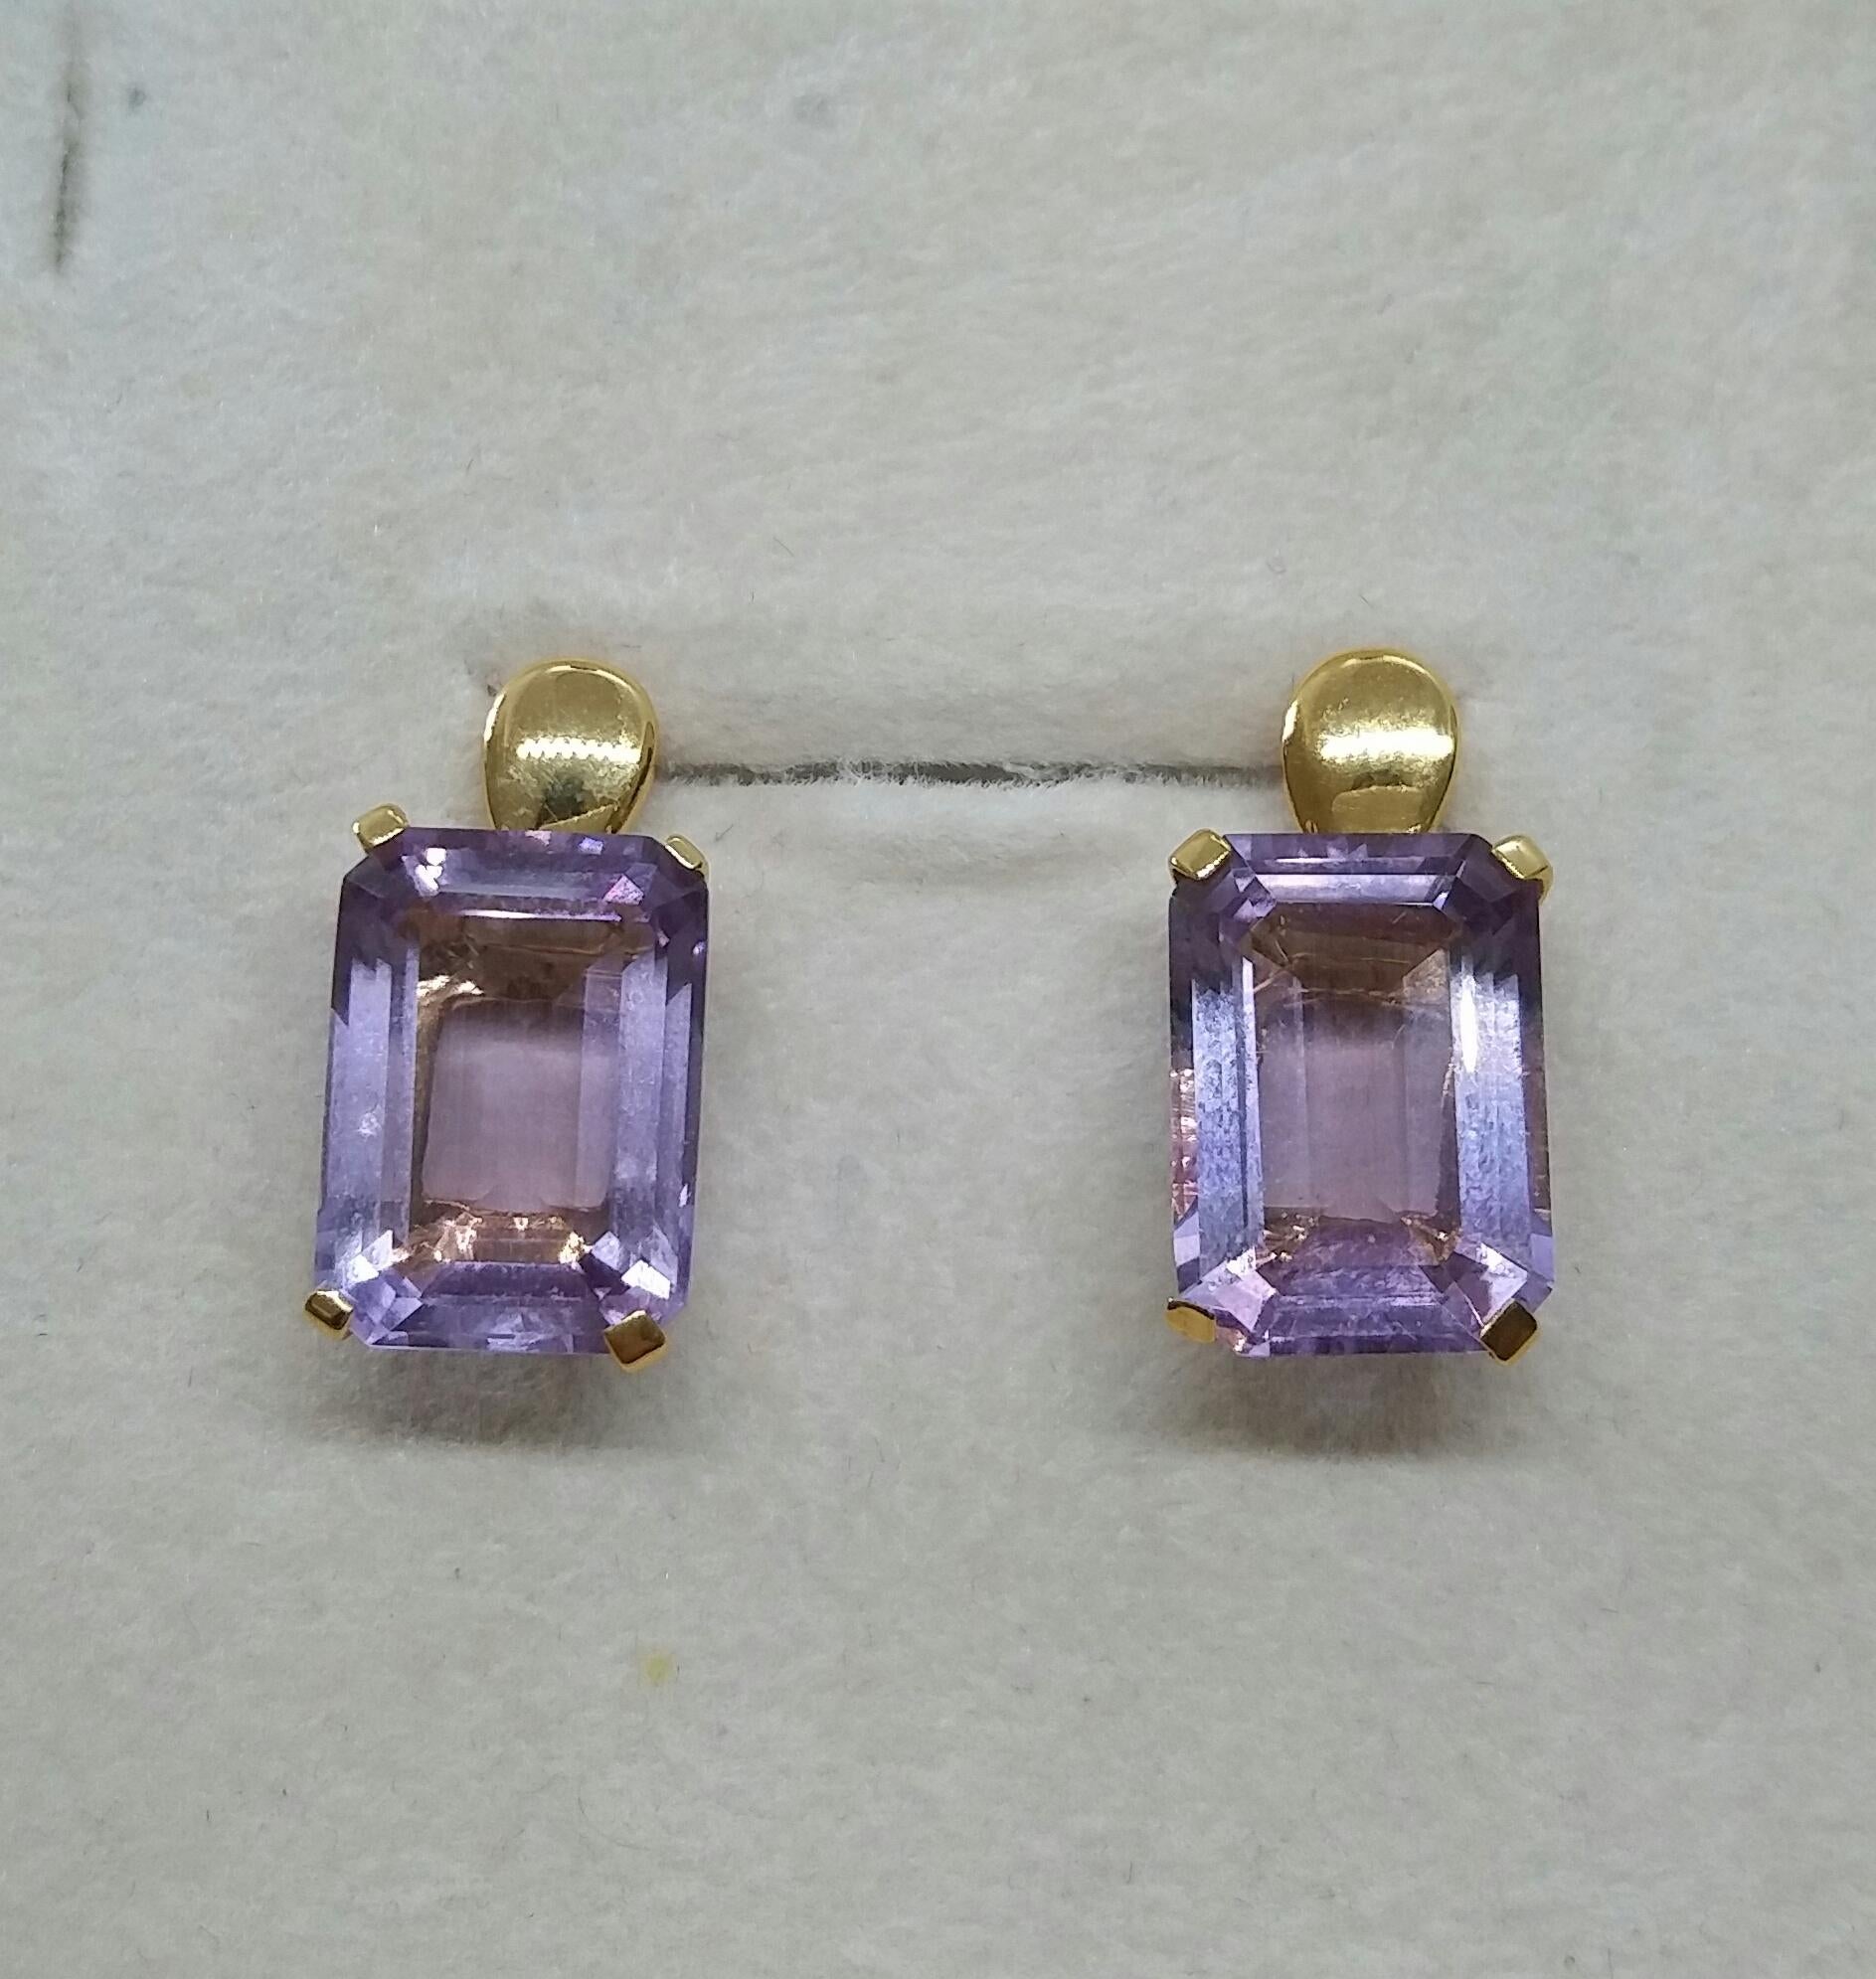 Octagon Cut Faceted Genuine Amethyst Octagon Shape 14 Karat Yellow Gold Stud Earrings For Sale